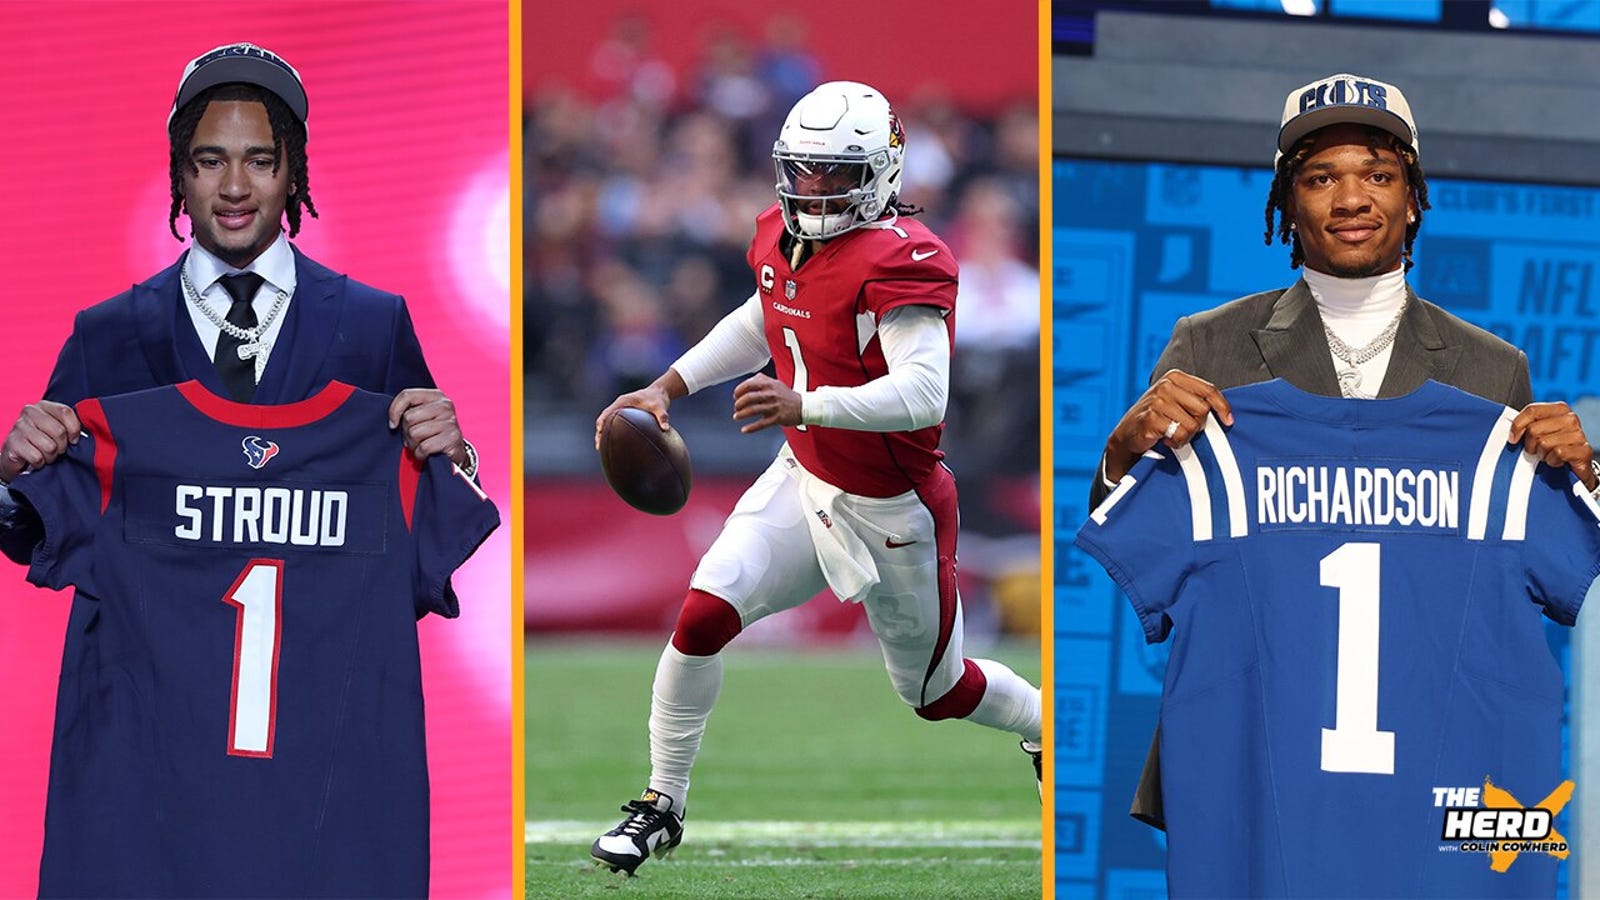 Take the over or under on Cardinals, Colts, Texans win totals? 